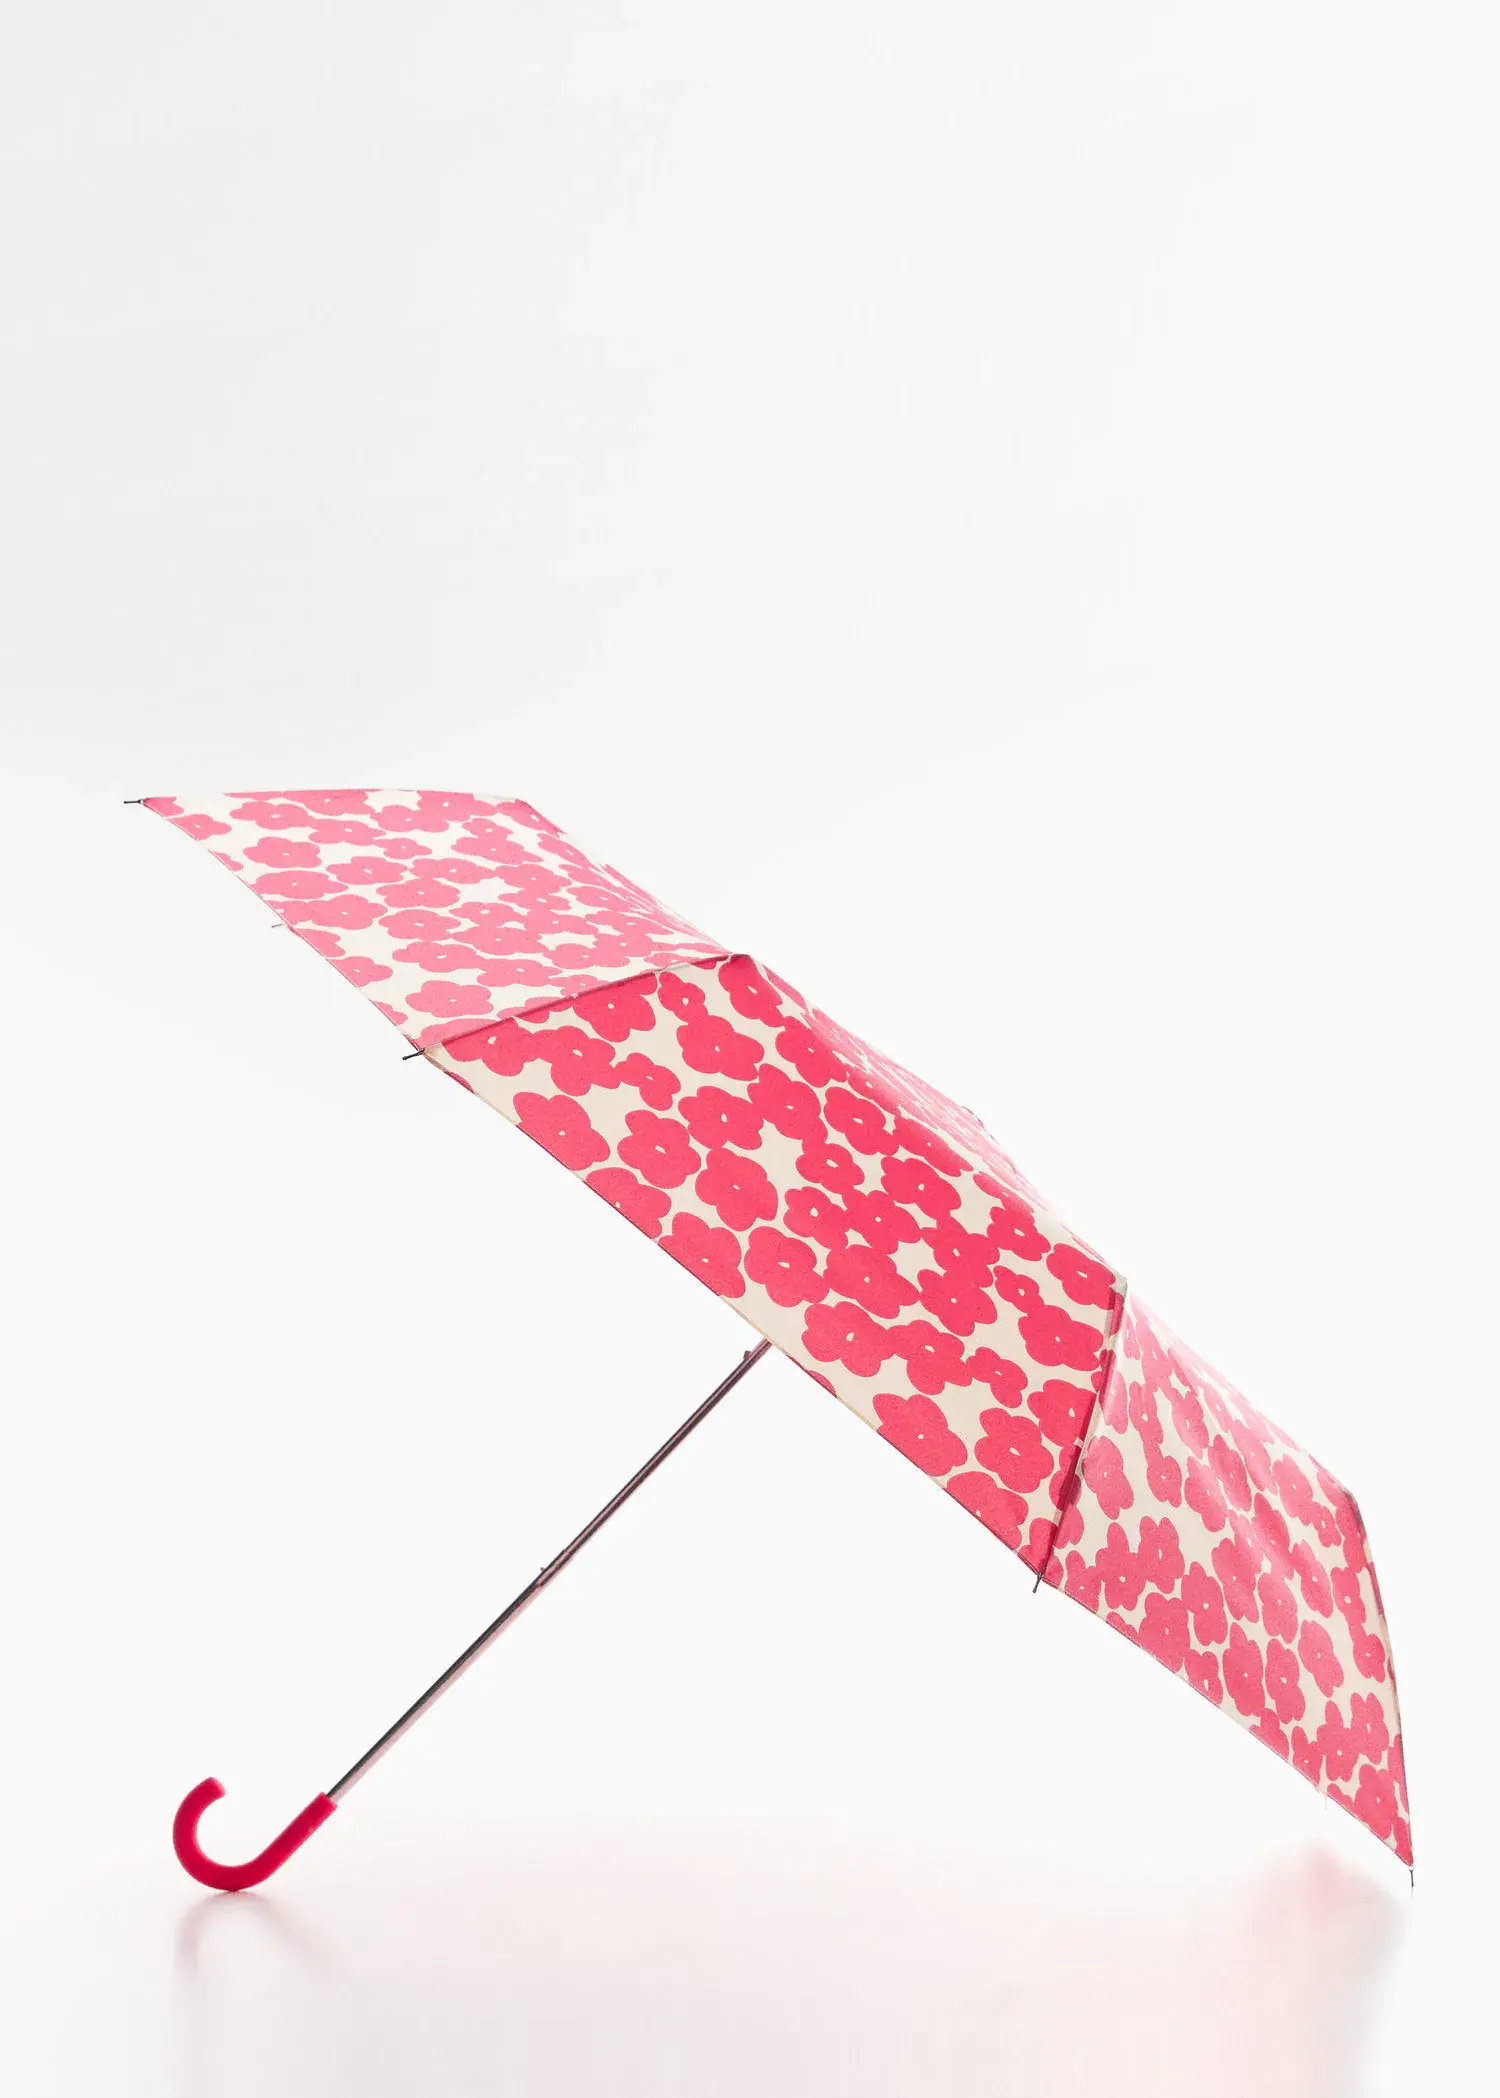 Mango Floral folding umbrella. an open umbrella with a red and white pattern. 